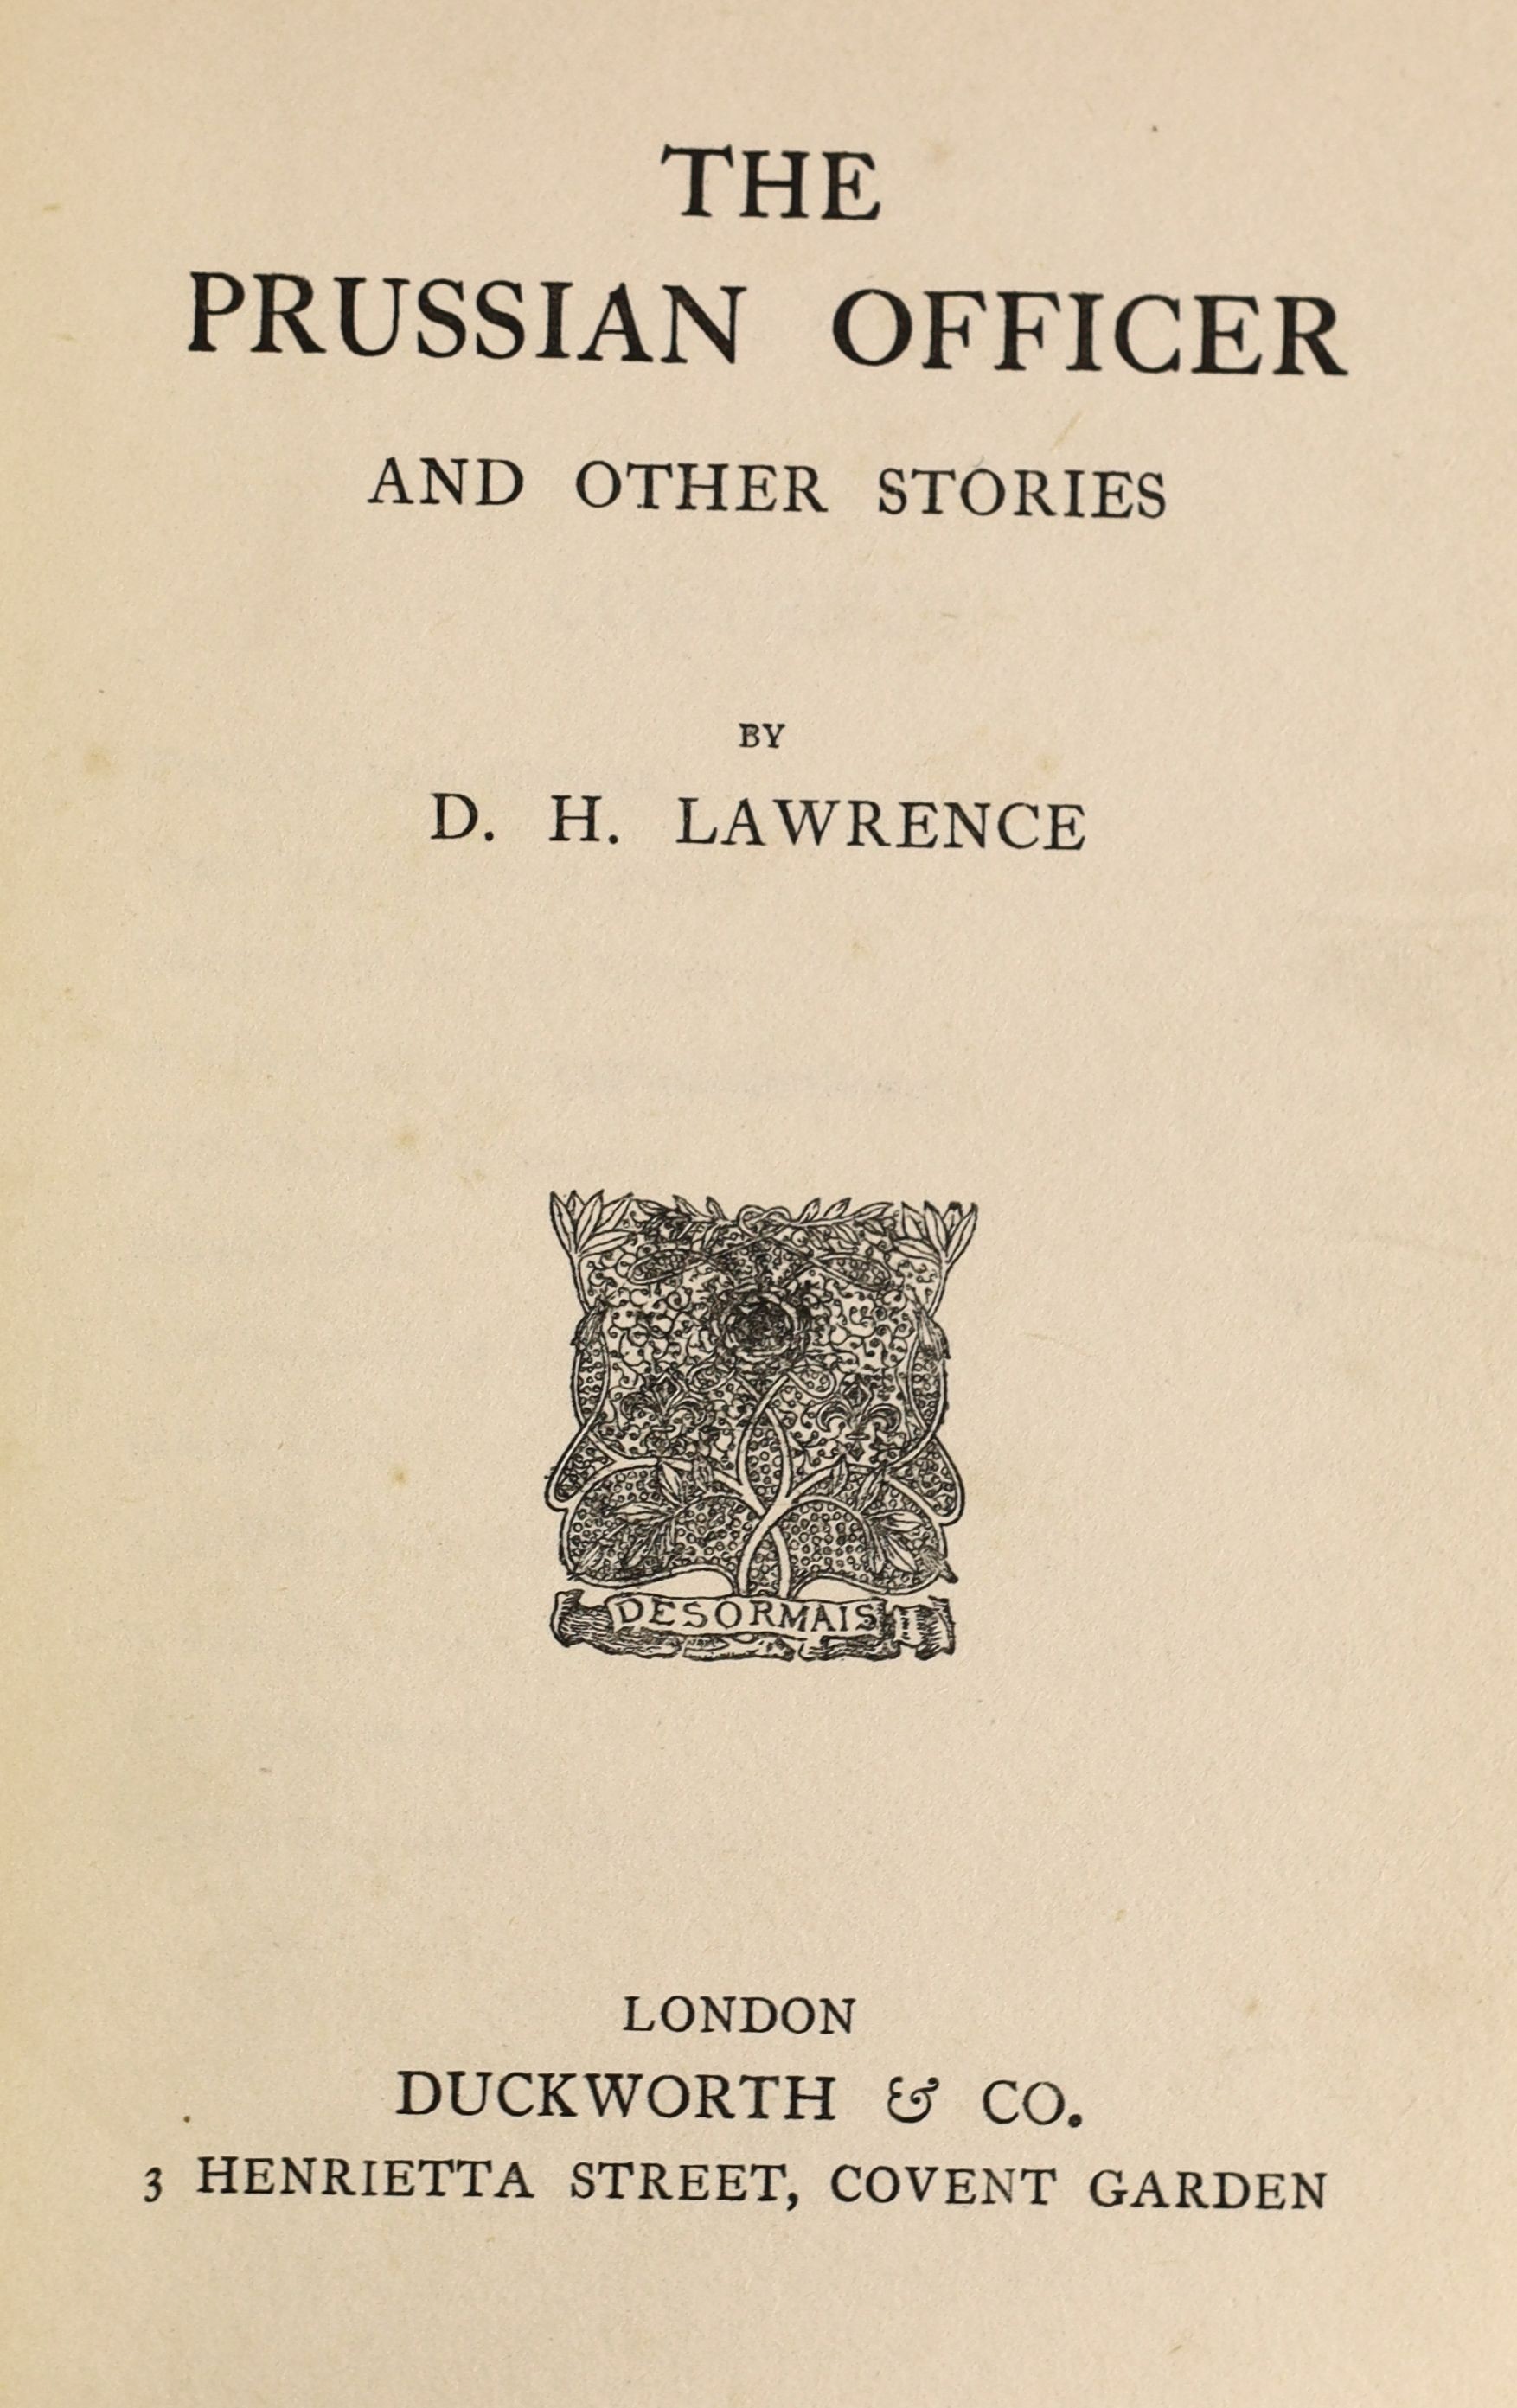 Lawrence, David Herbert - The Prussian Officer and Other Stories, 1st edition, 8vo, Duckworth & Co., London, 1914